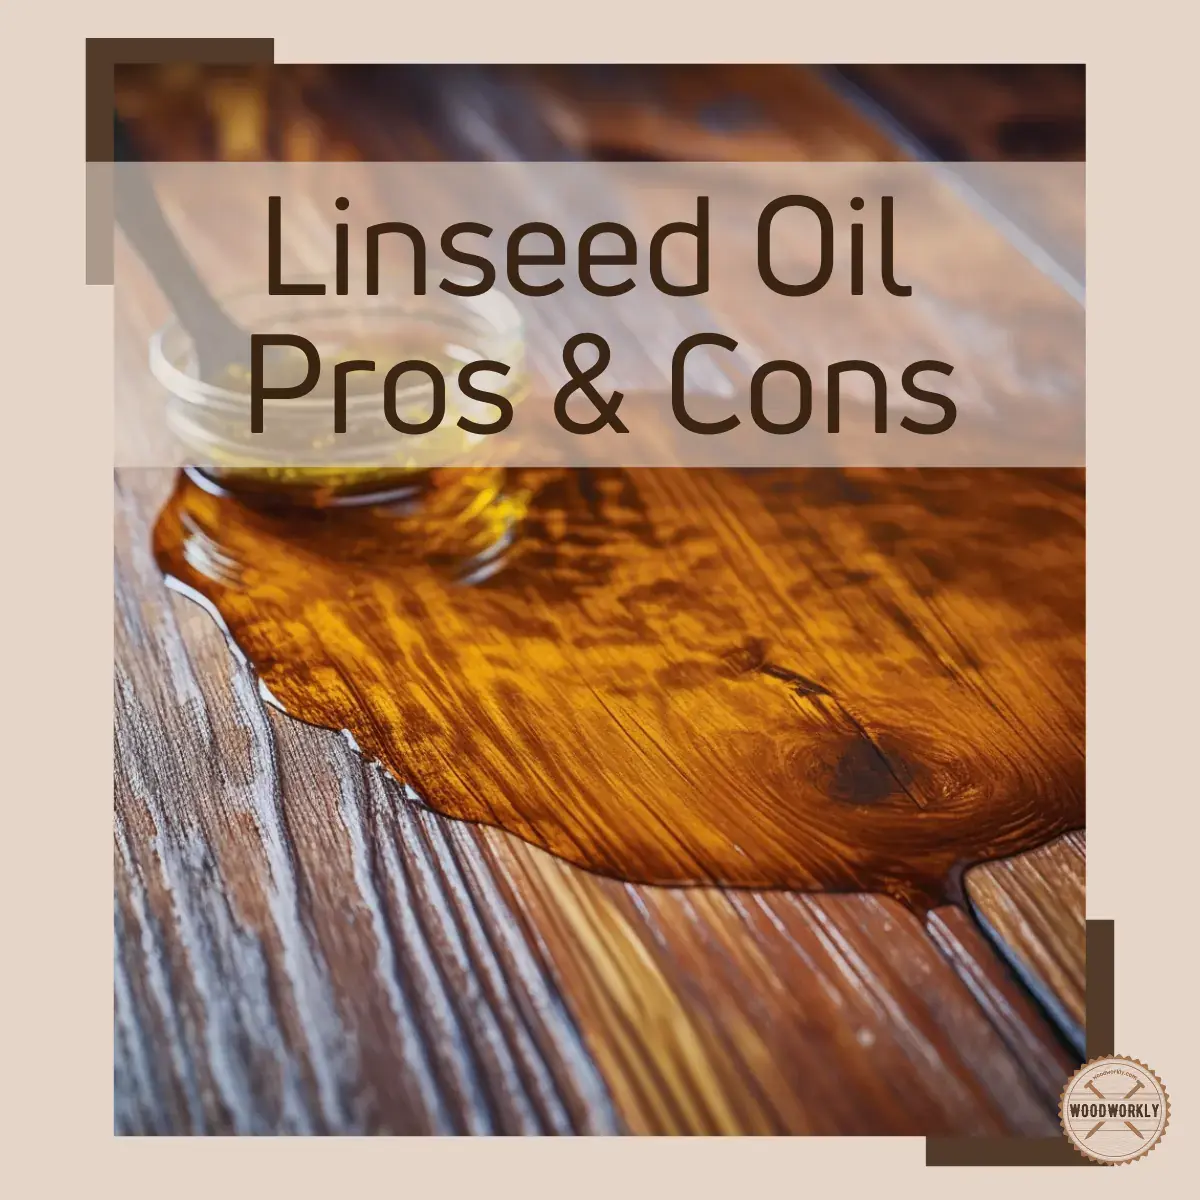 why can't you use boiled linseed oil on oak